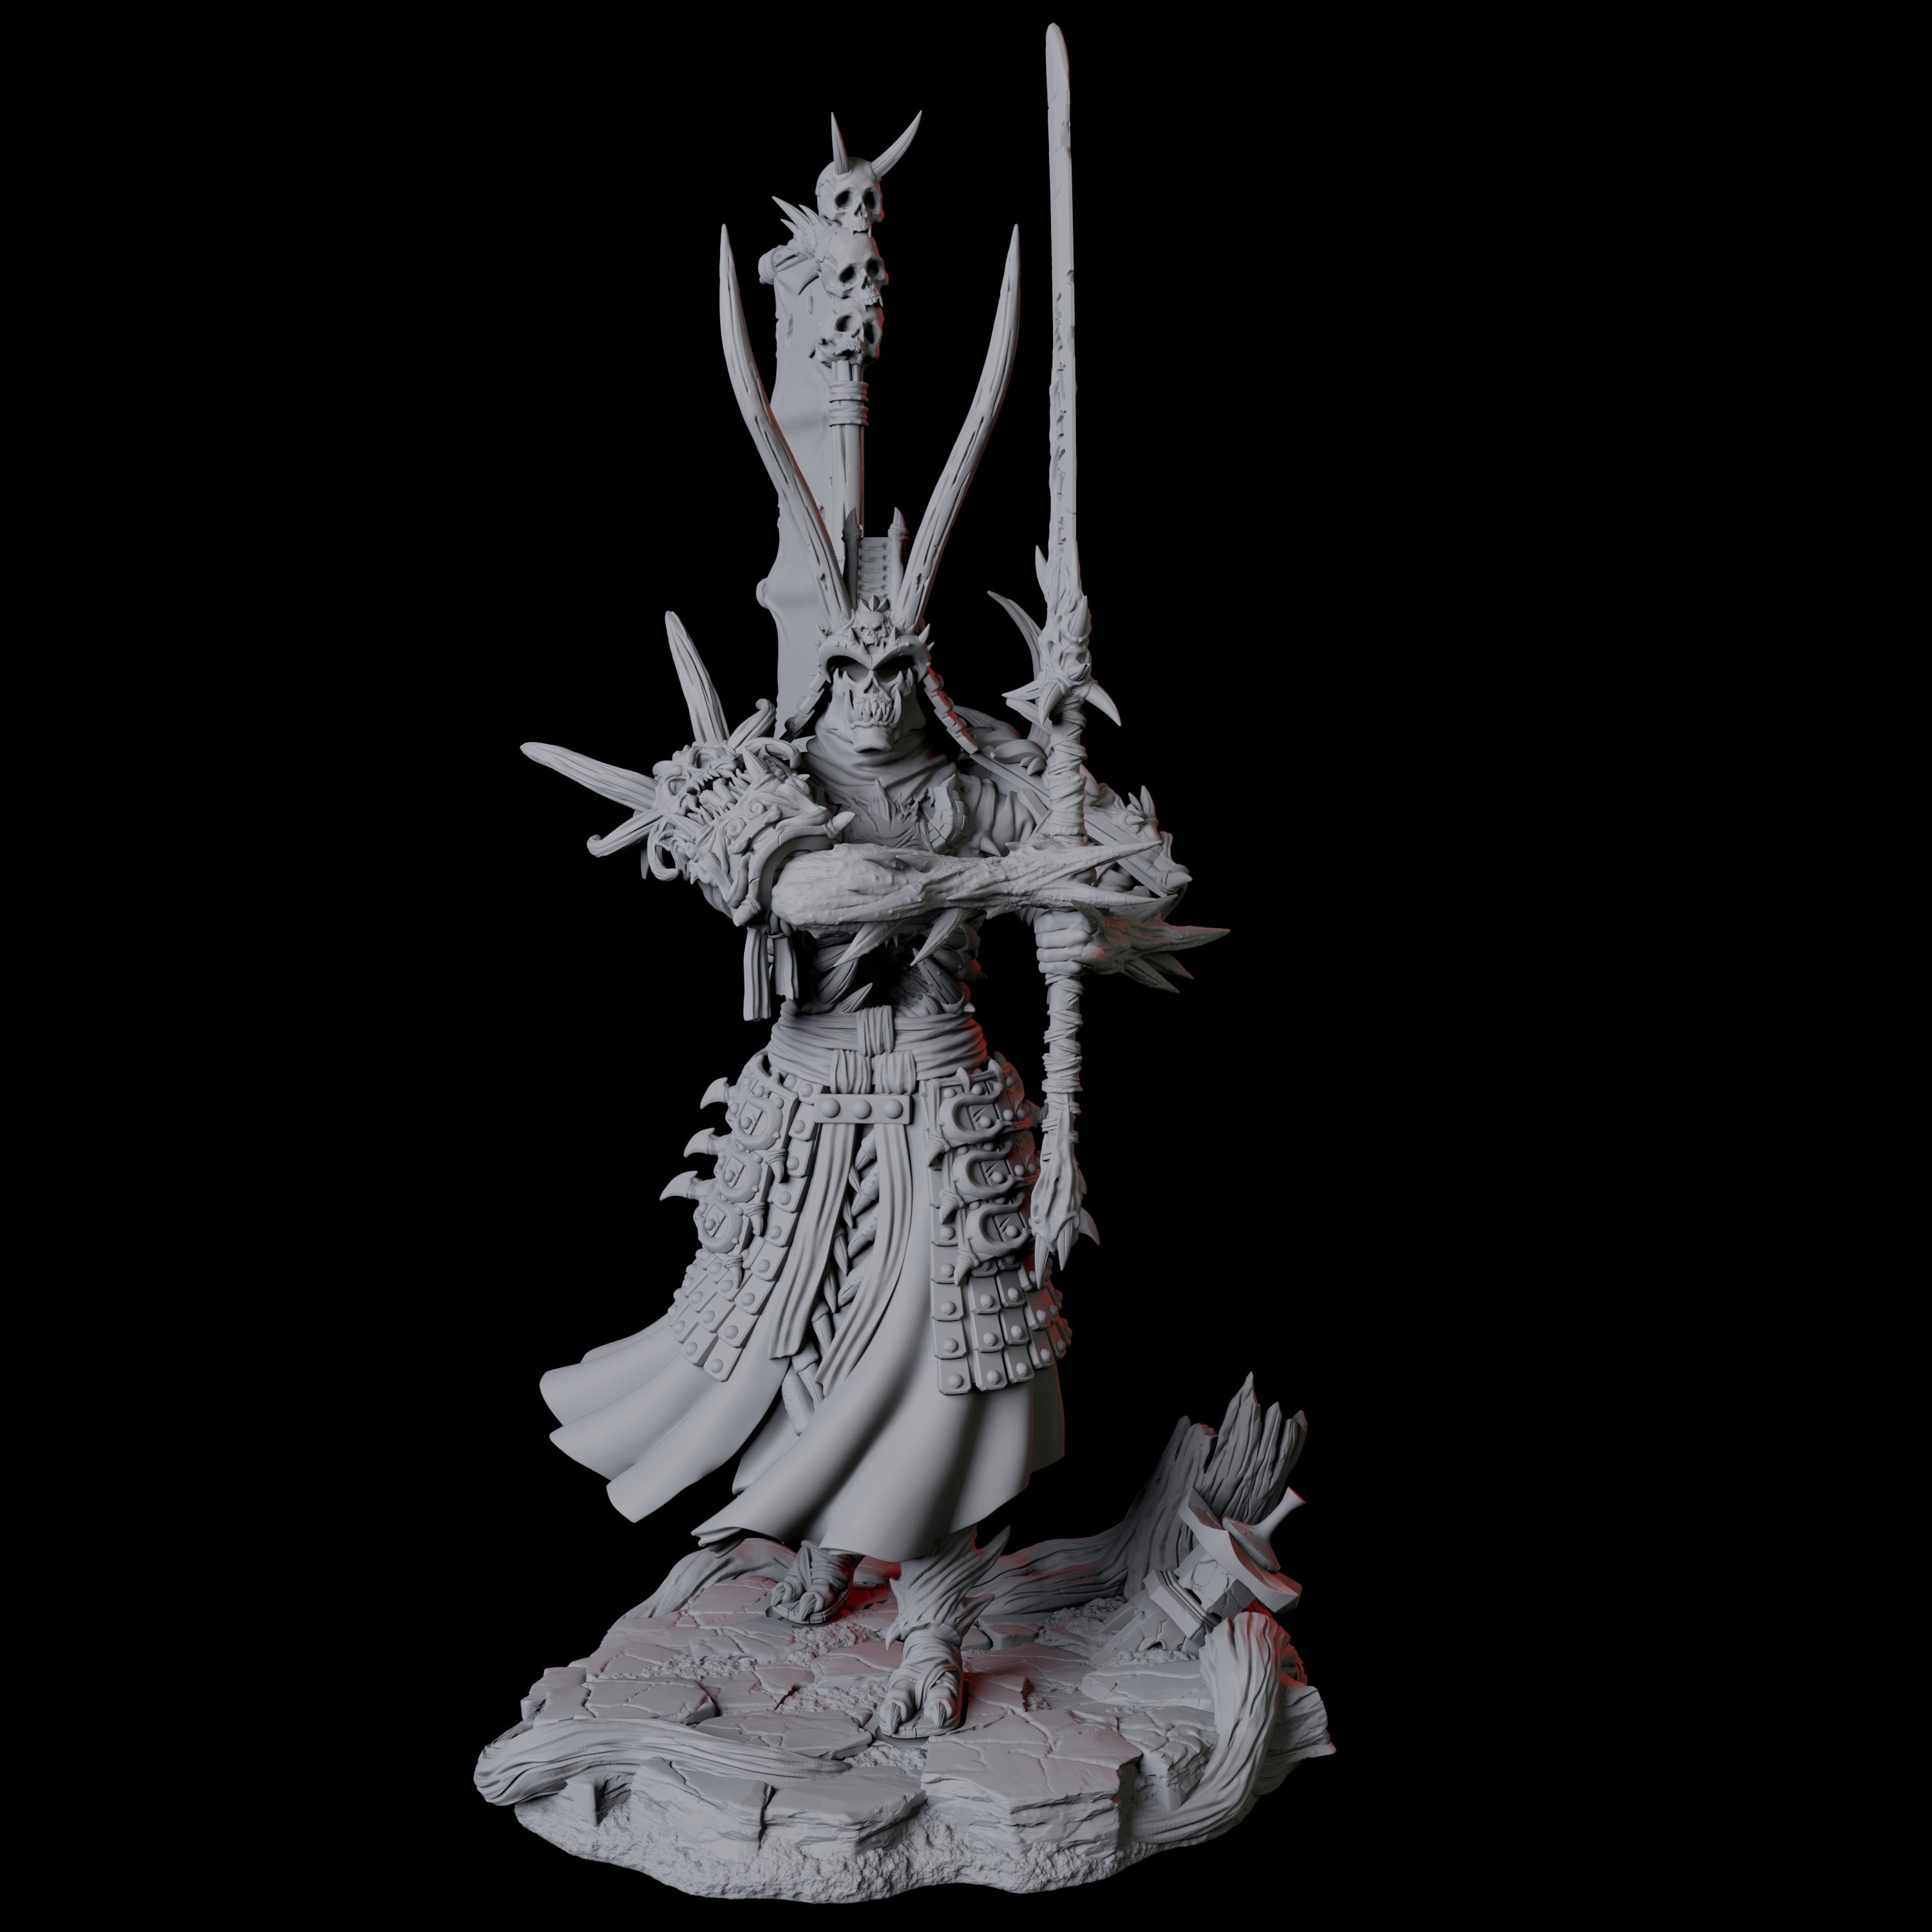 Skeletal Undead Samurai D Miniature for Dungeons and Dragons, Pathfinder or other TTRPGs